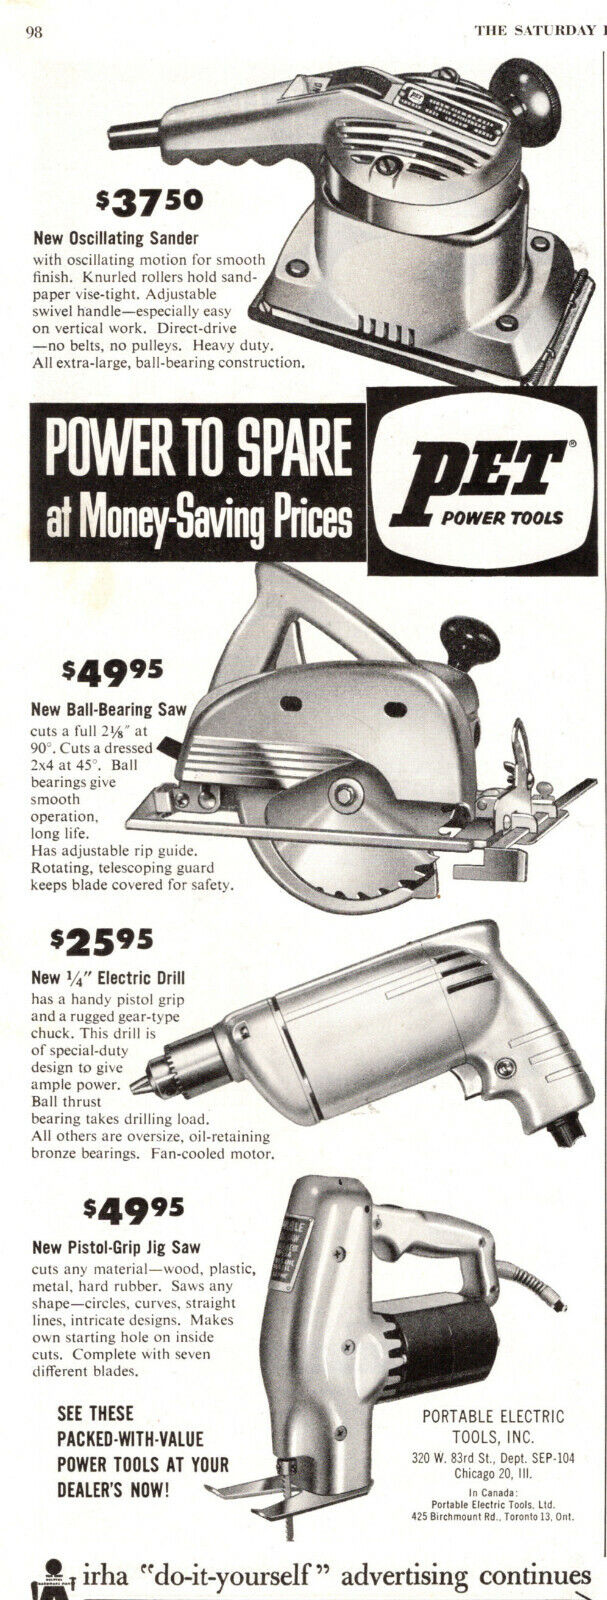 1954 Vintage Ad For Pet Power Tools Jig Saw, Sanders, Drills More! 060919